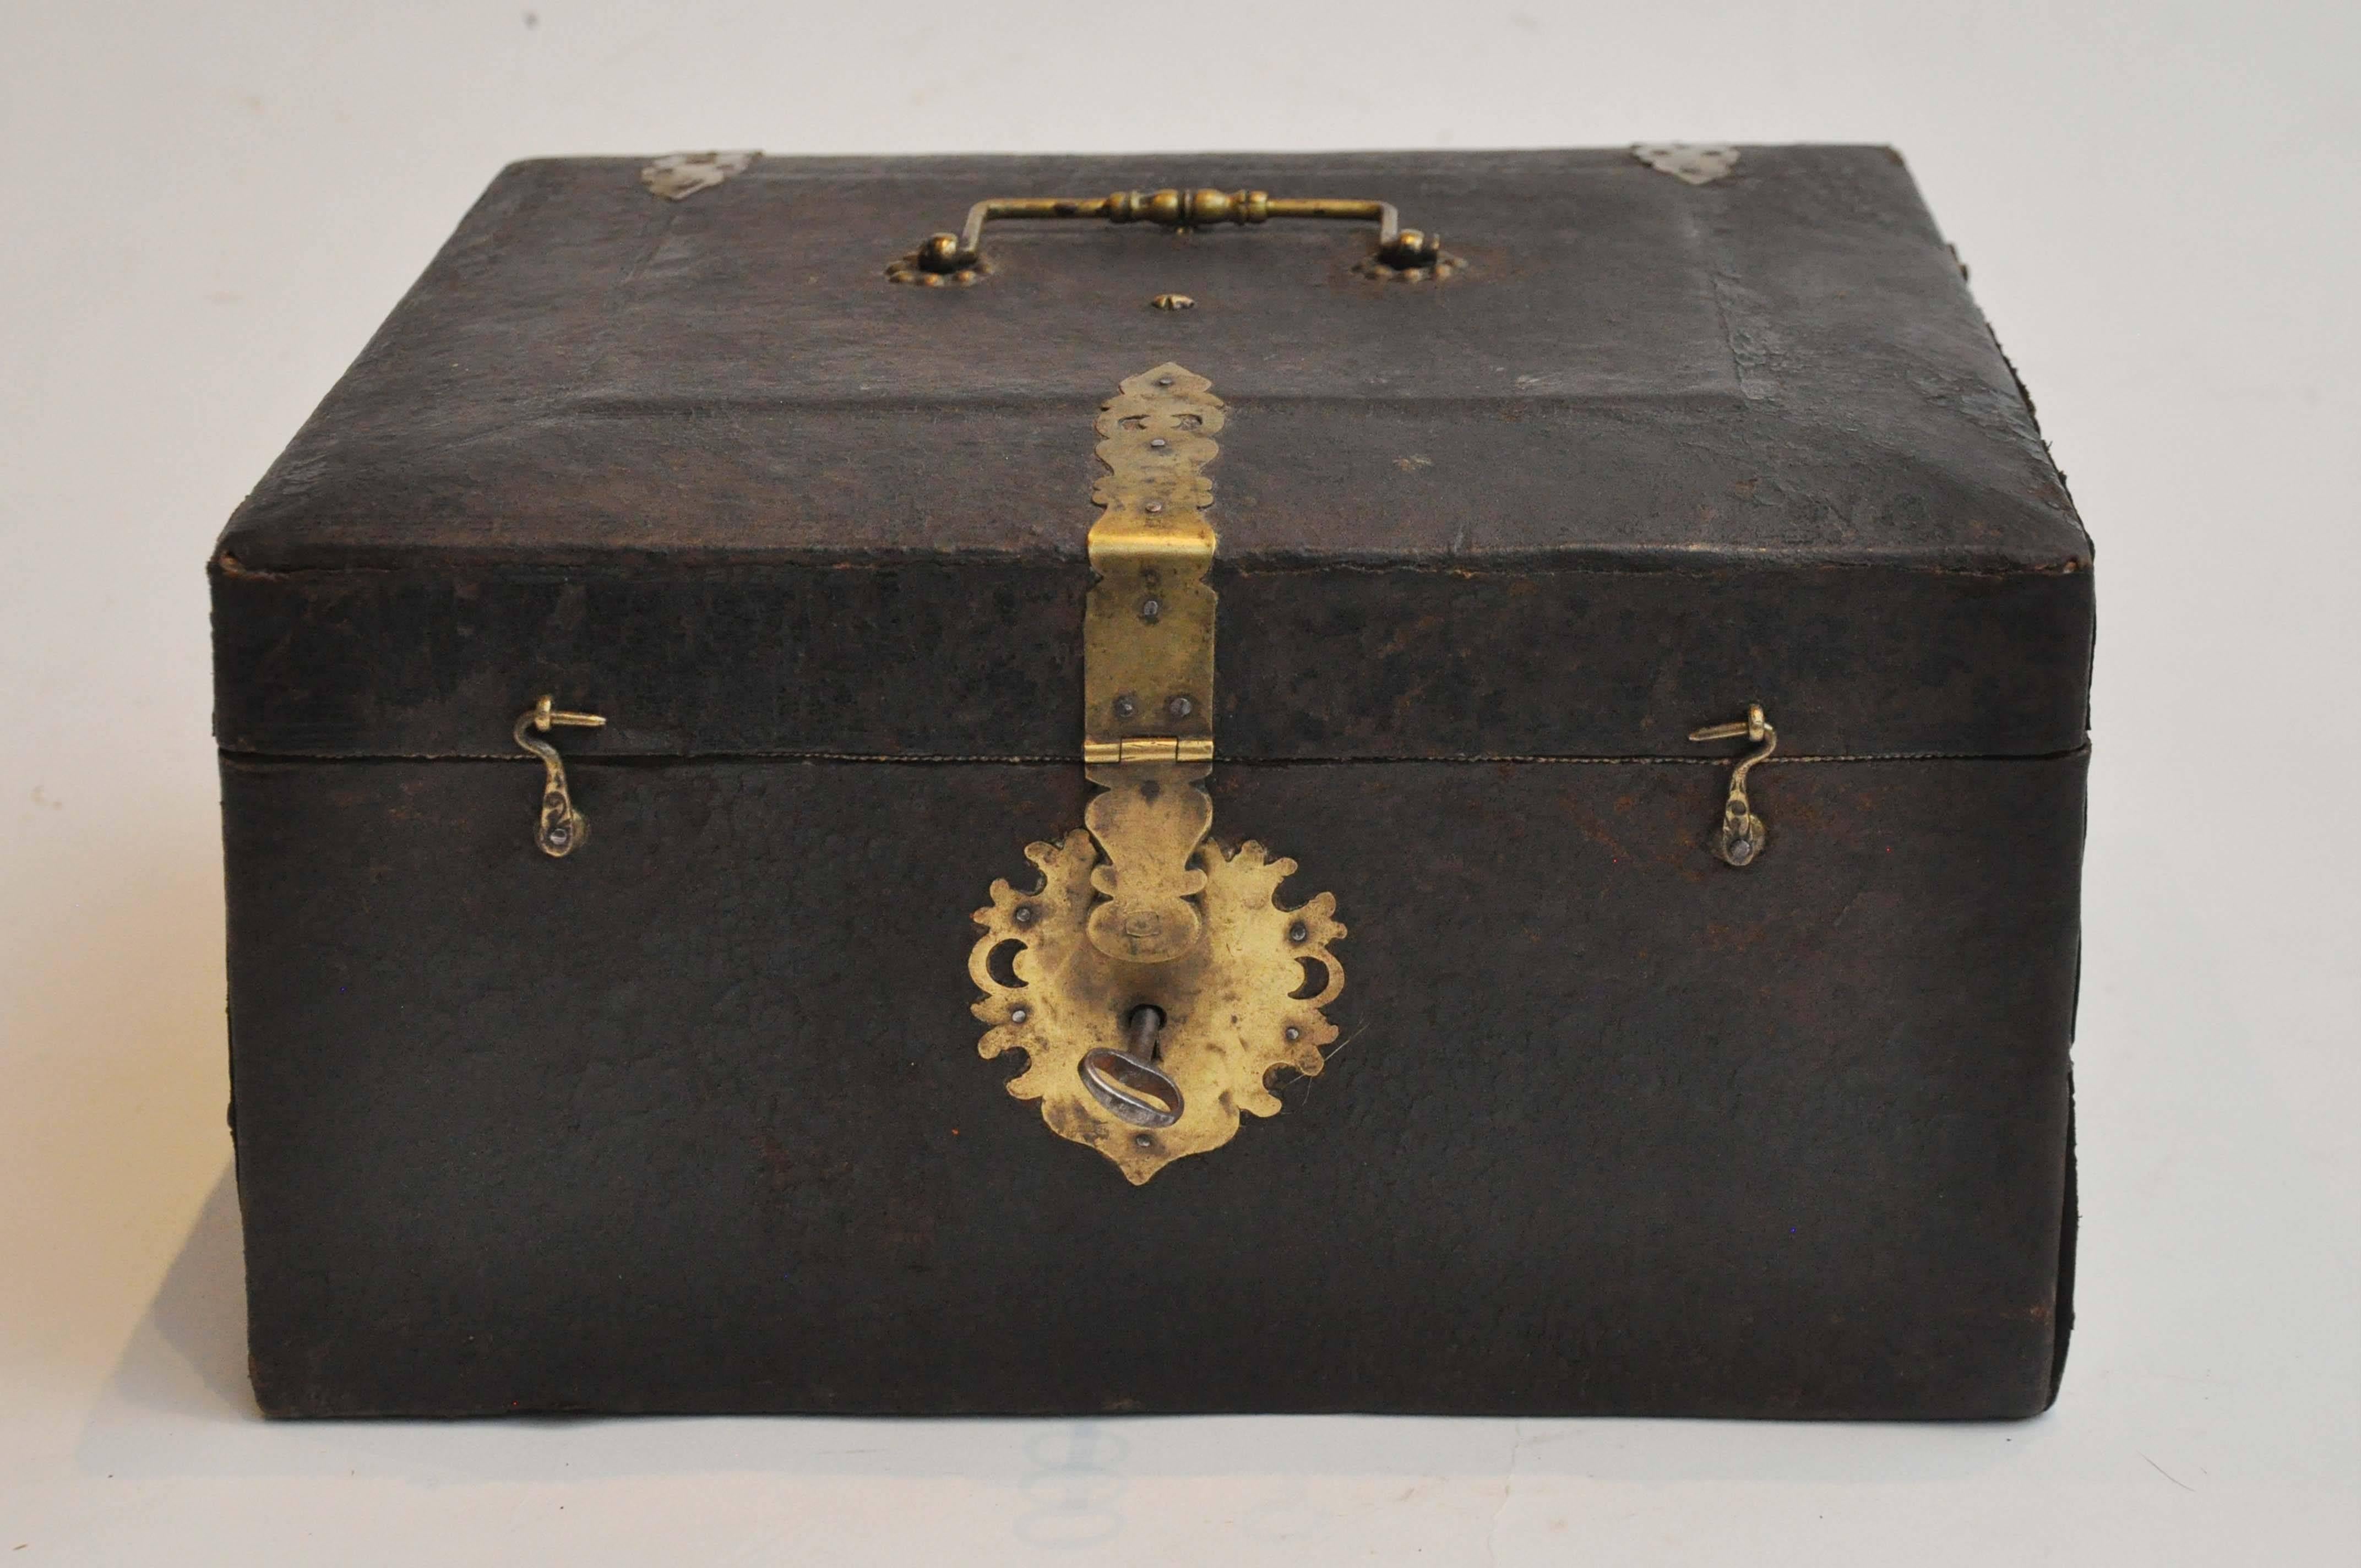 19th Century Leather and Brass Decorative Box from Germany. 
Beautifully constructed of leather exterior and brass details and an upholstered green interior. Was most likely a keepsake or Jewelry Box.
The interior also features a removable tray for